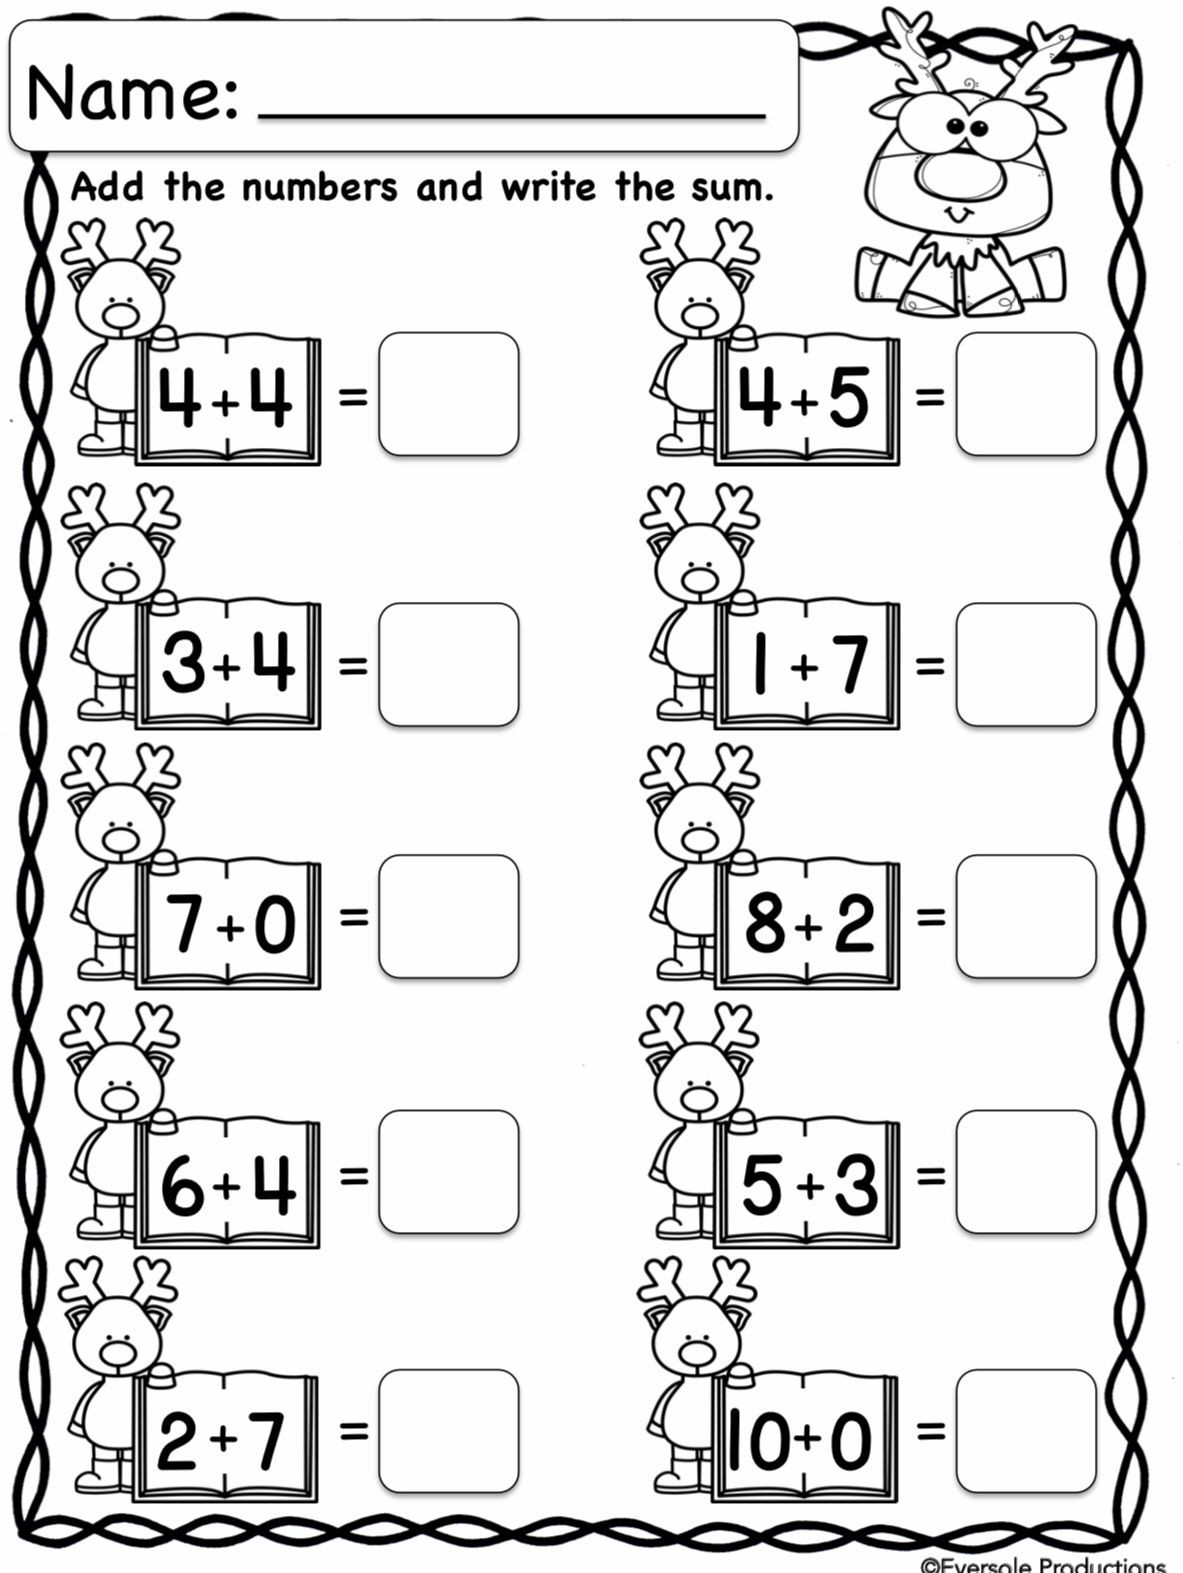 Christmas Counting Worksheets Kindergarten Christmas Math Adding and Subtracting within 10 No Prep